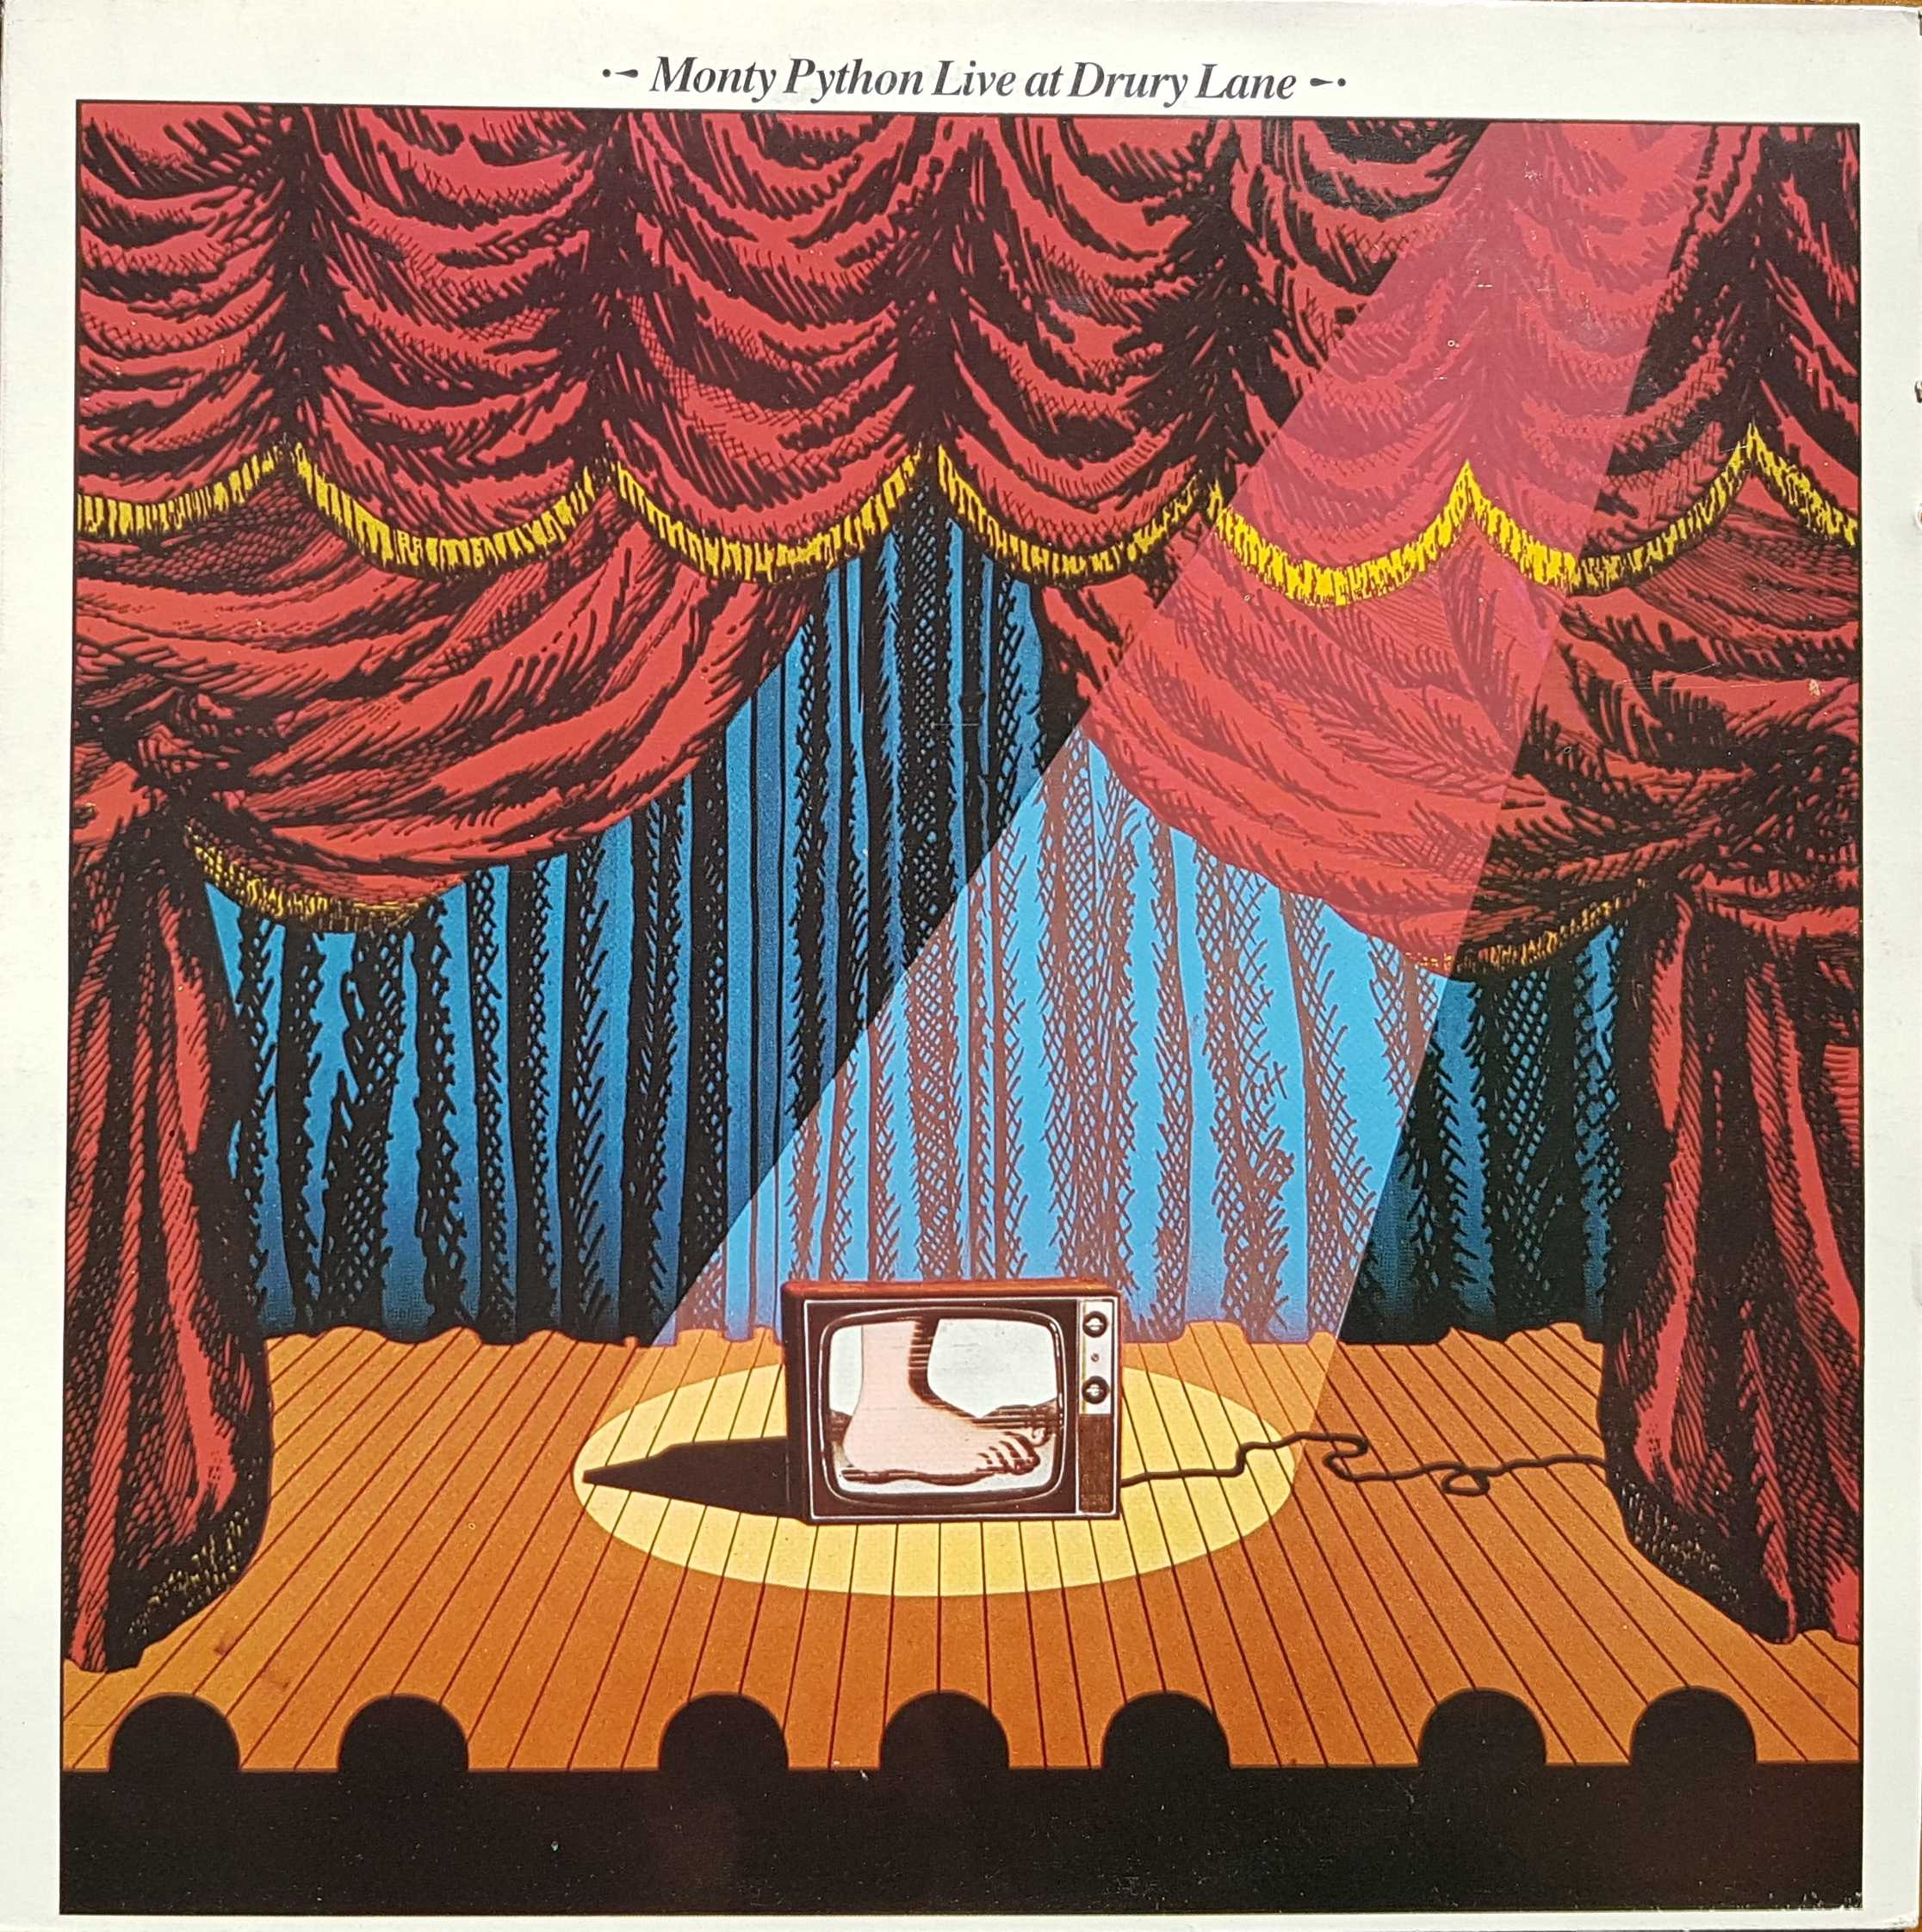 Picture of VVIP 104 Live at the Theatre Royal, Drury Lane by artist Monty Python from the BBC albums - Records and Tapes library